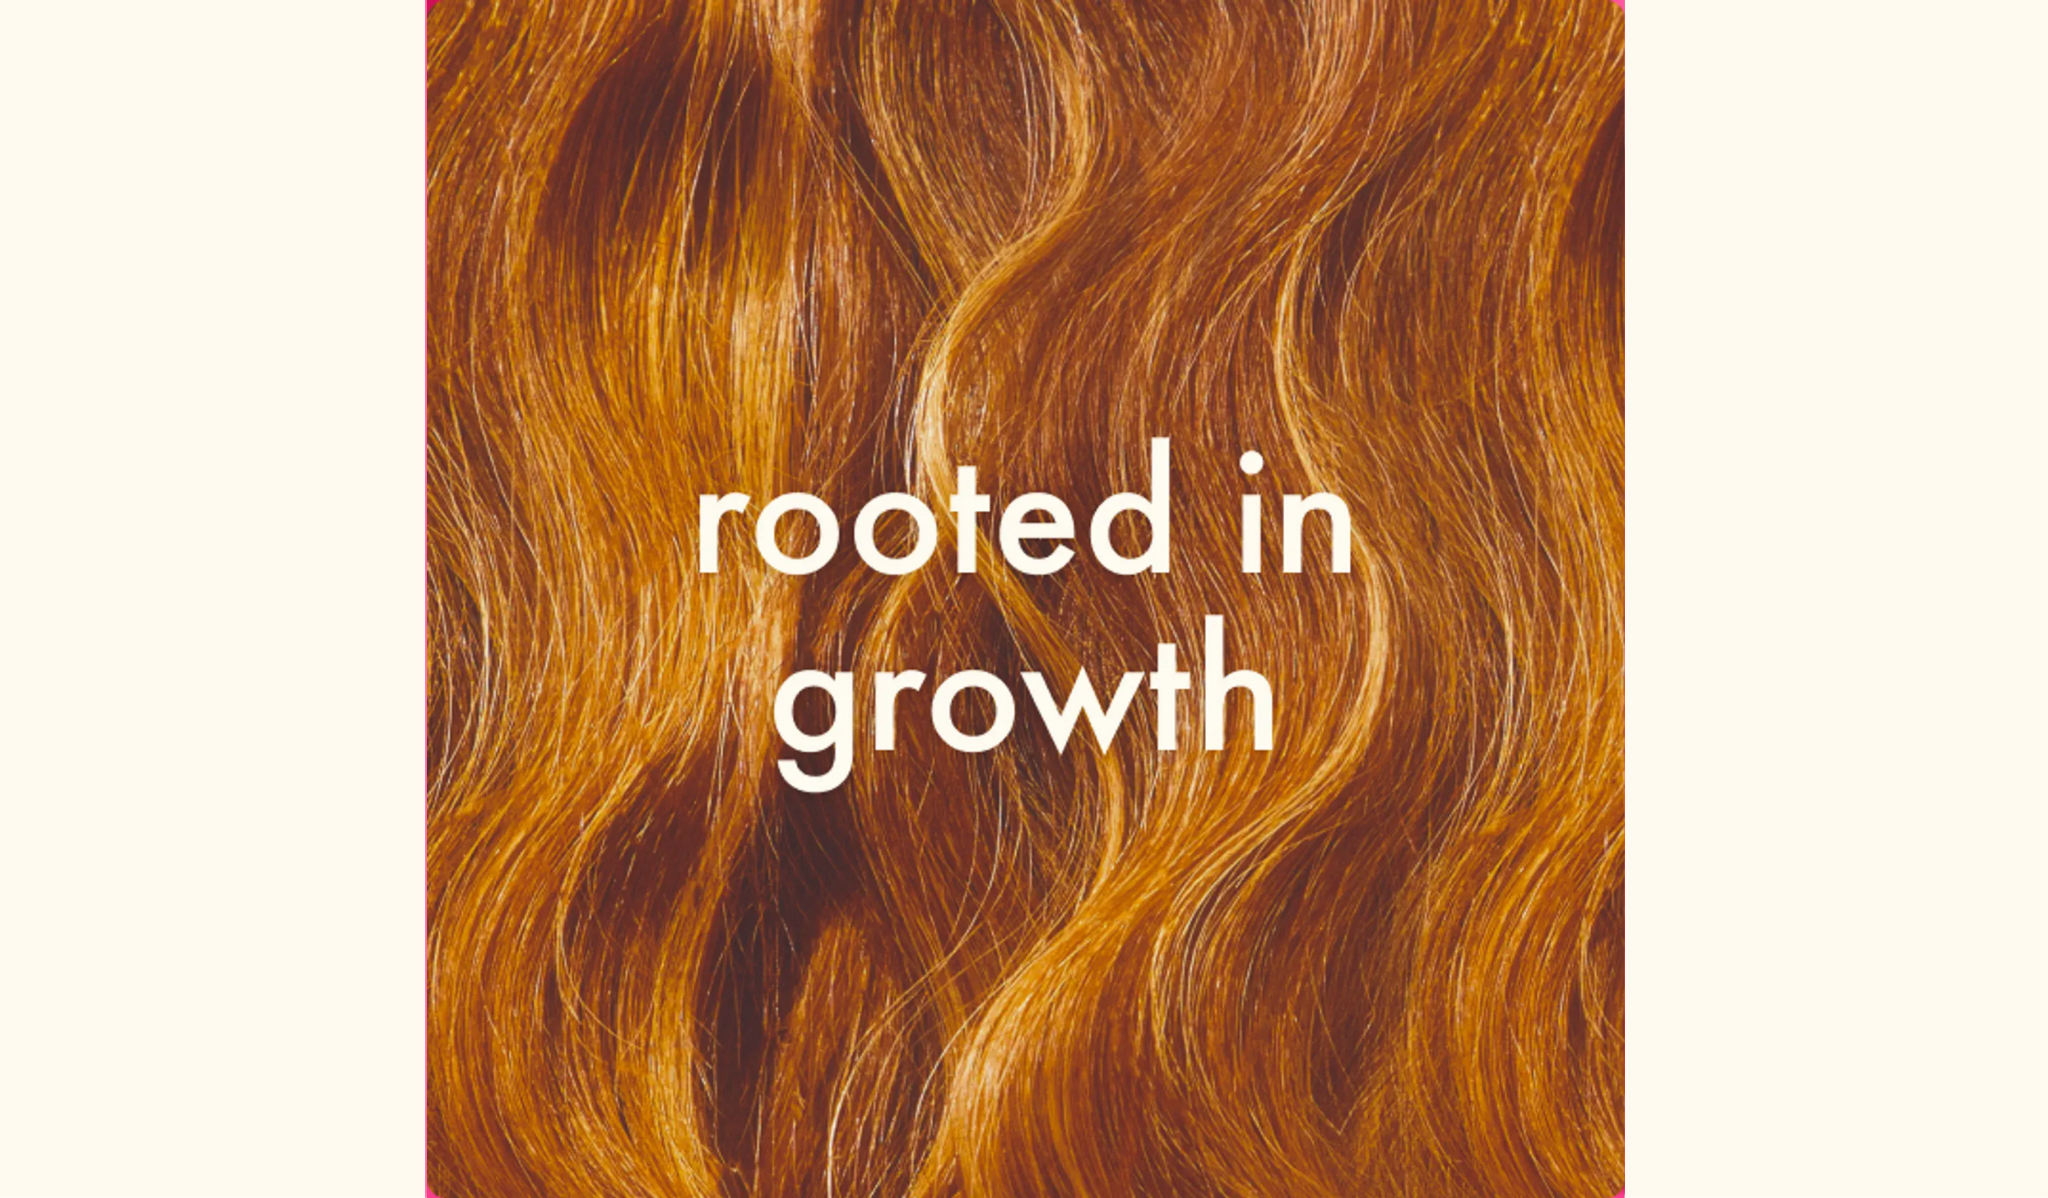 amika x sogal foundation rooted in growth program